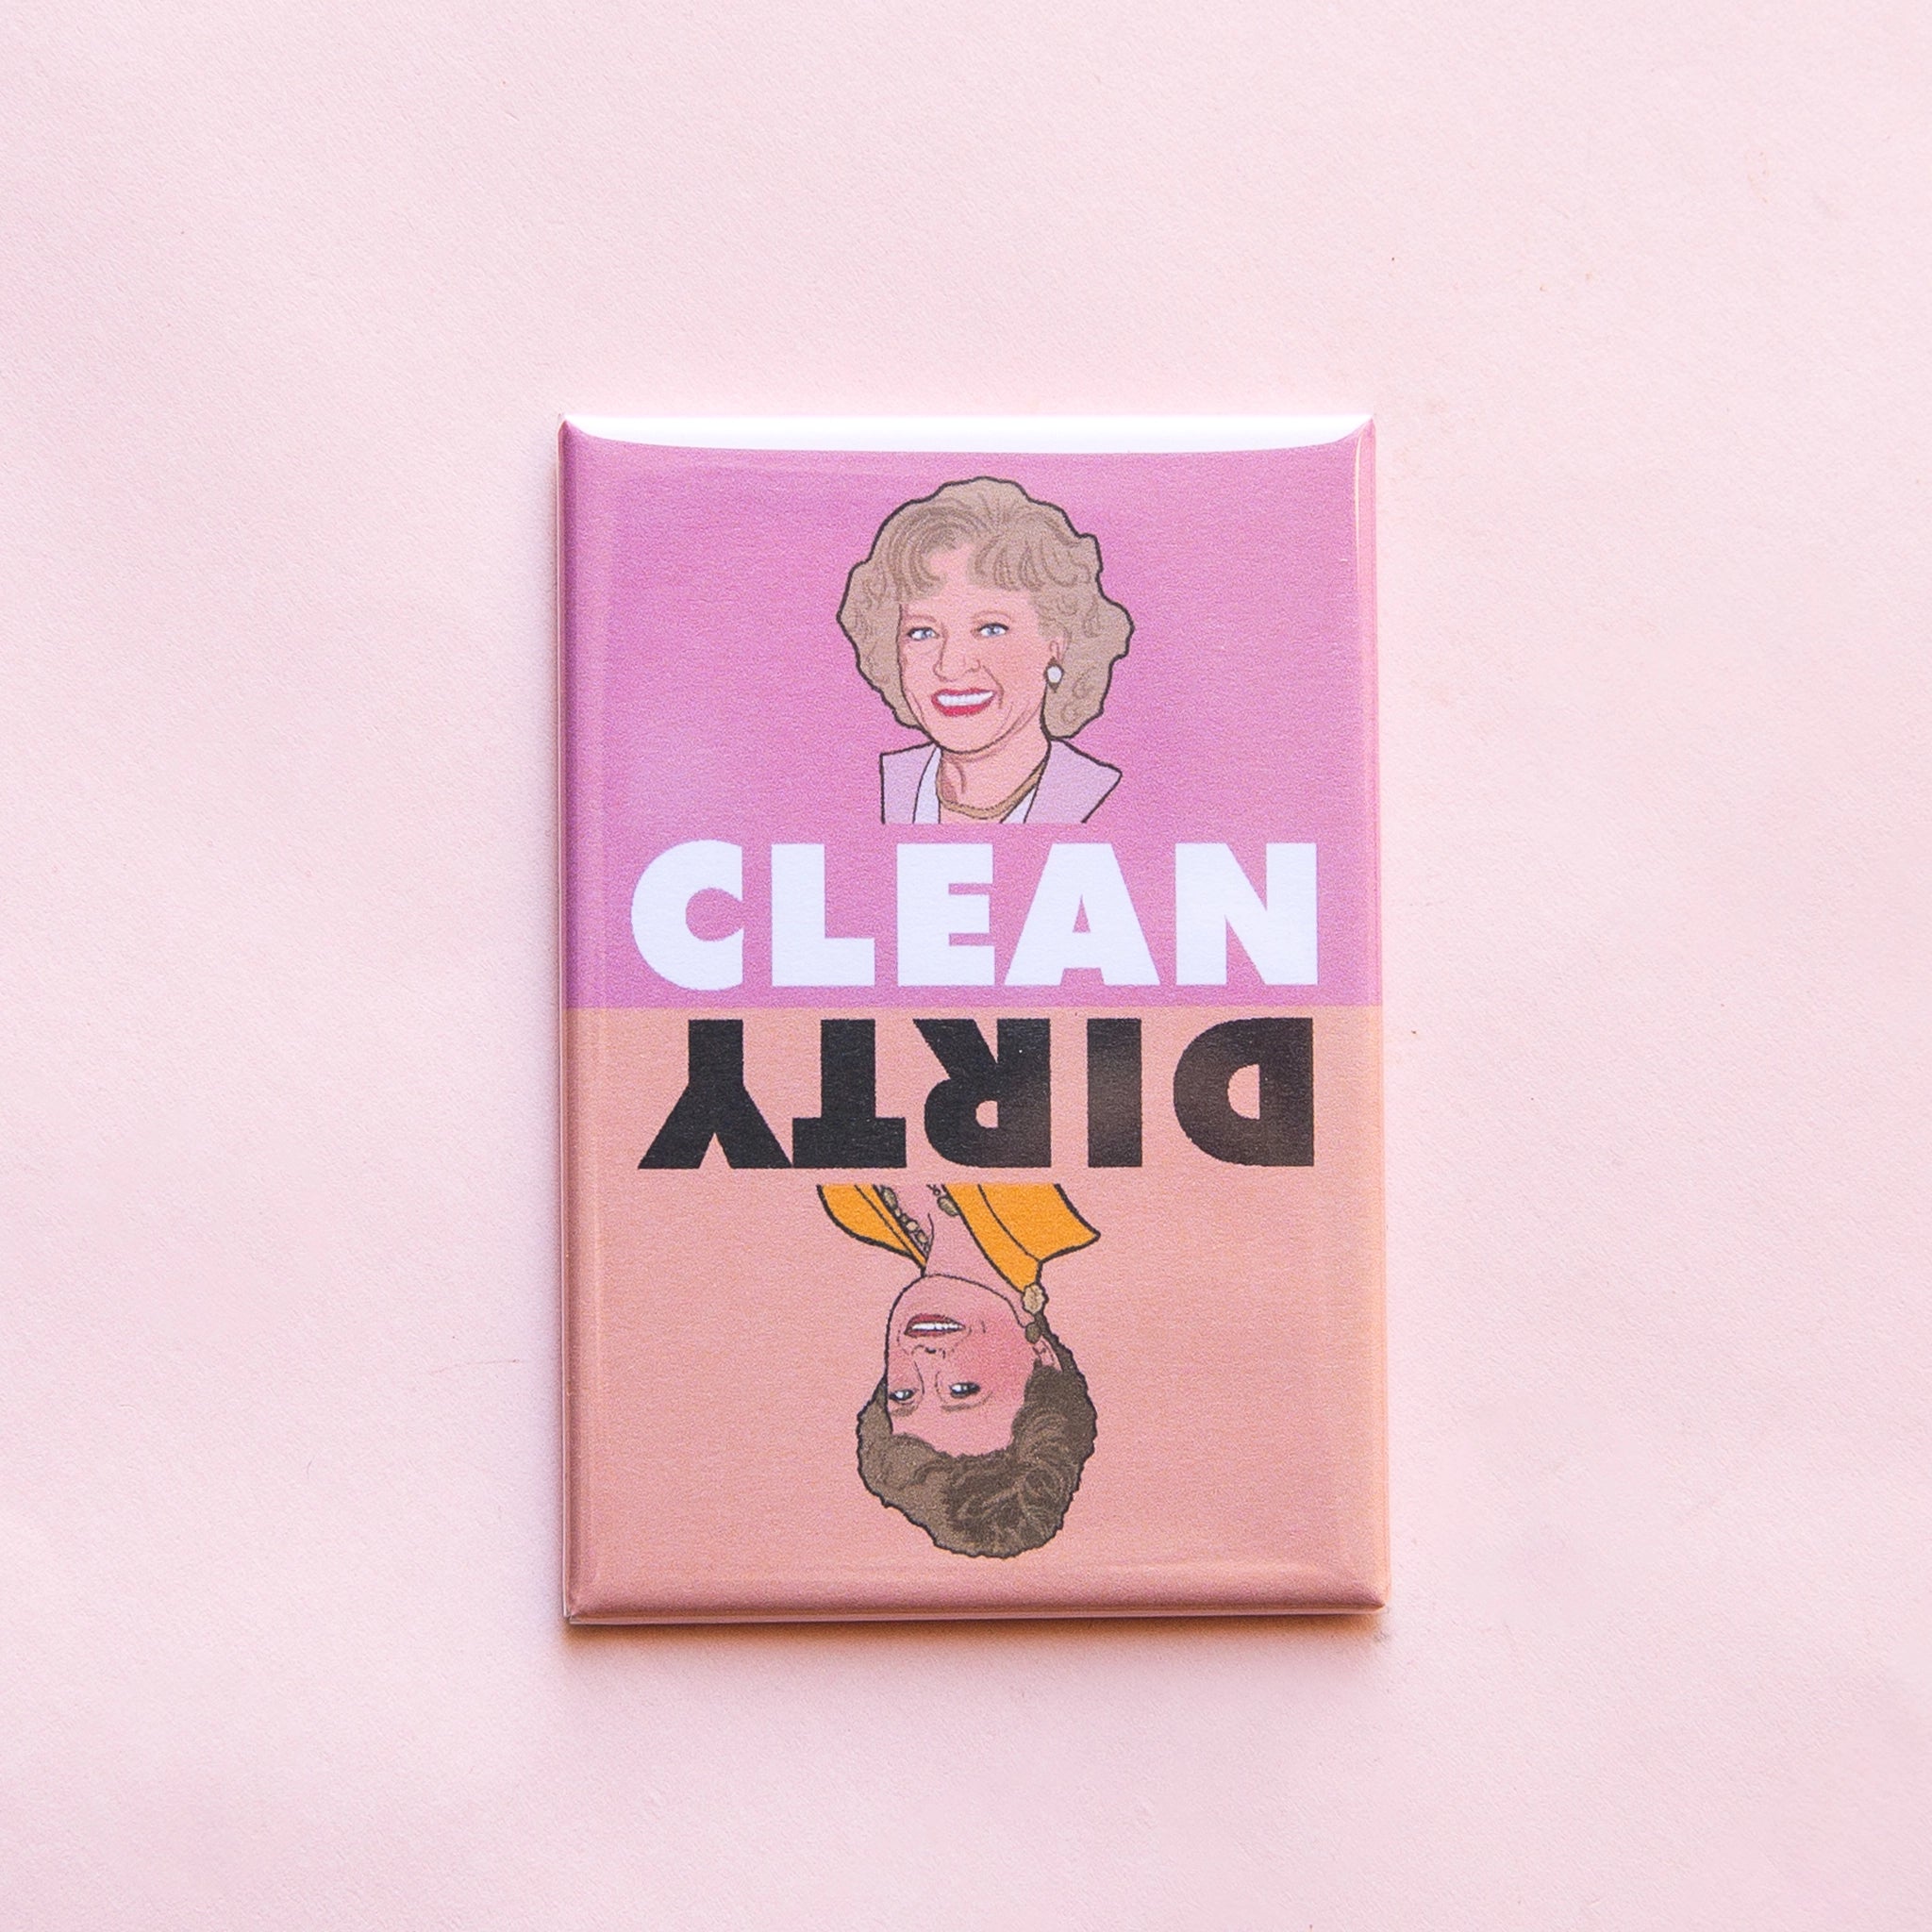 On a pink background is a pink rectangle magnet with rose and blanche from the golden girls on each side of the magnet with "Dirty" on one side and "Clean" on the other. 